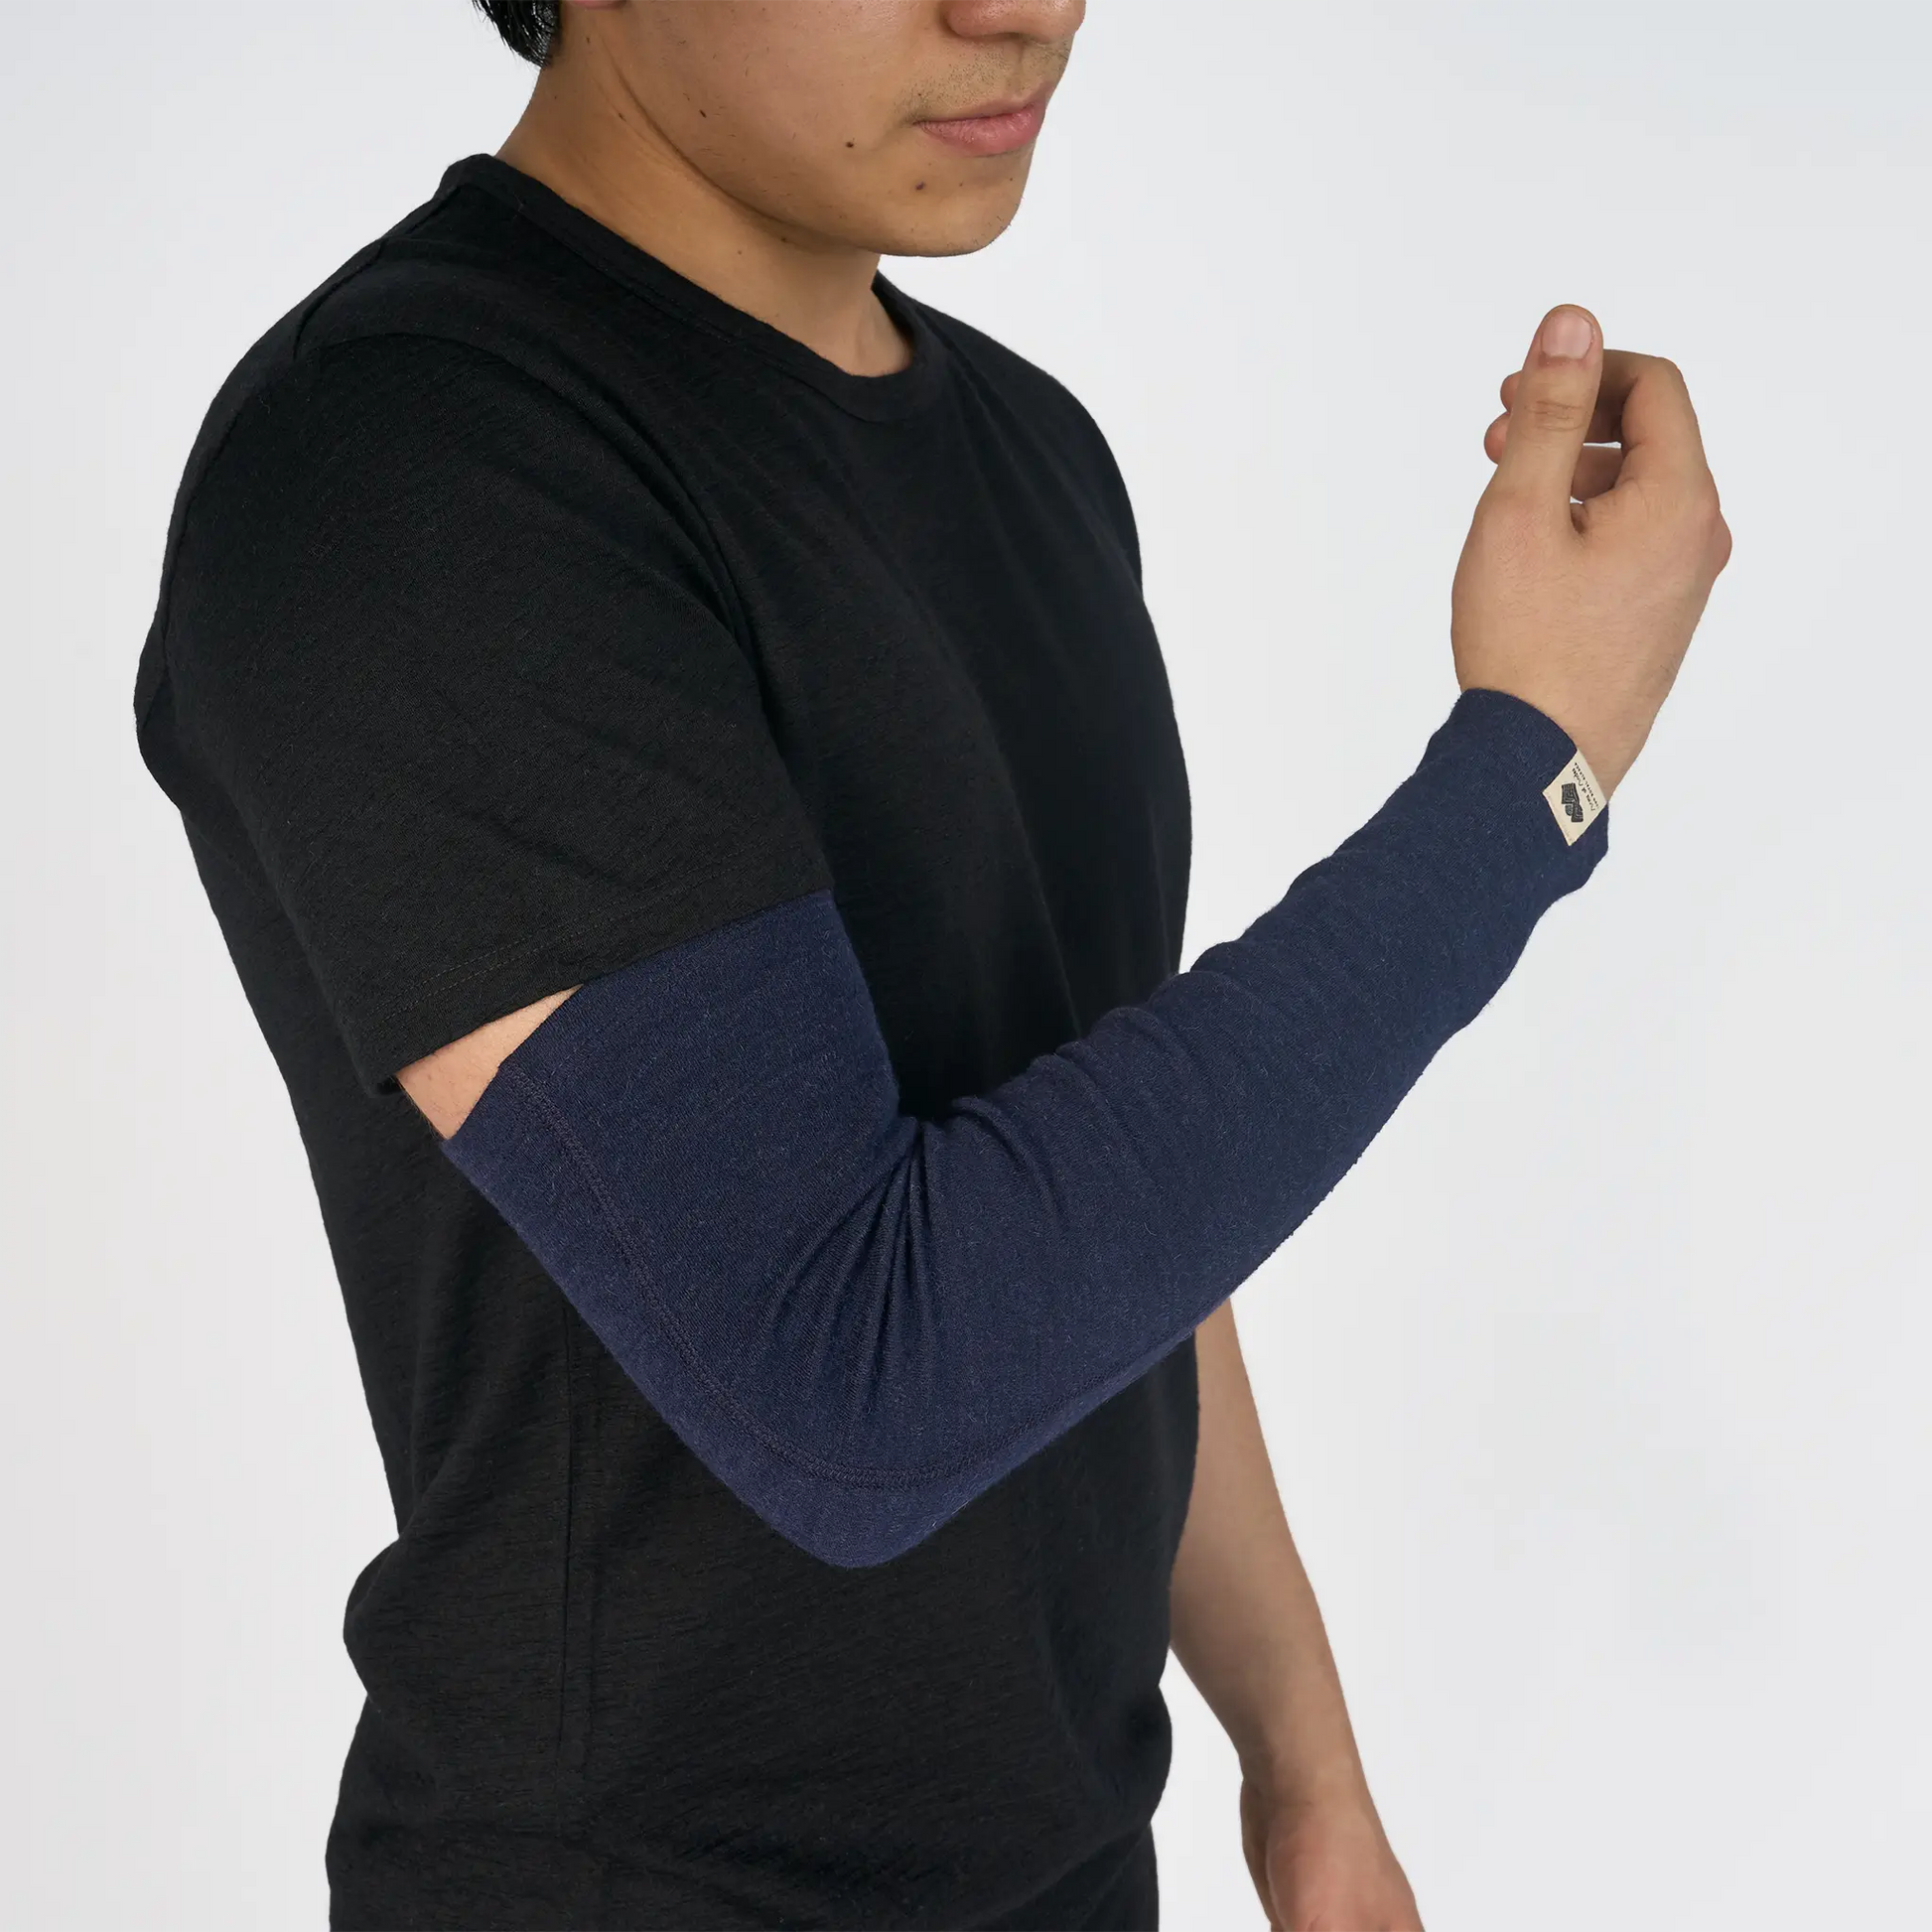 mens wind protection sleeve color navy blue